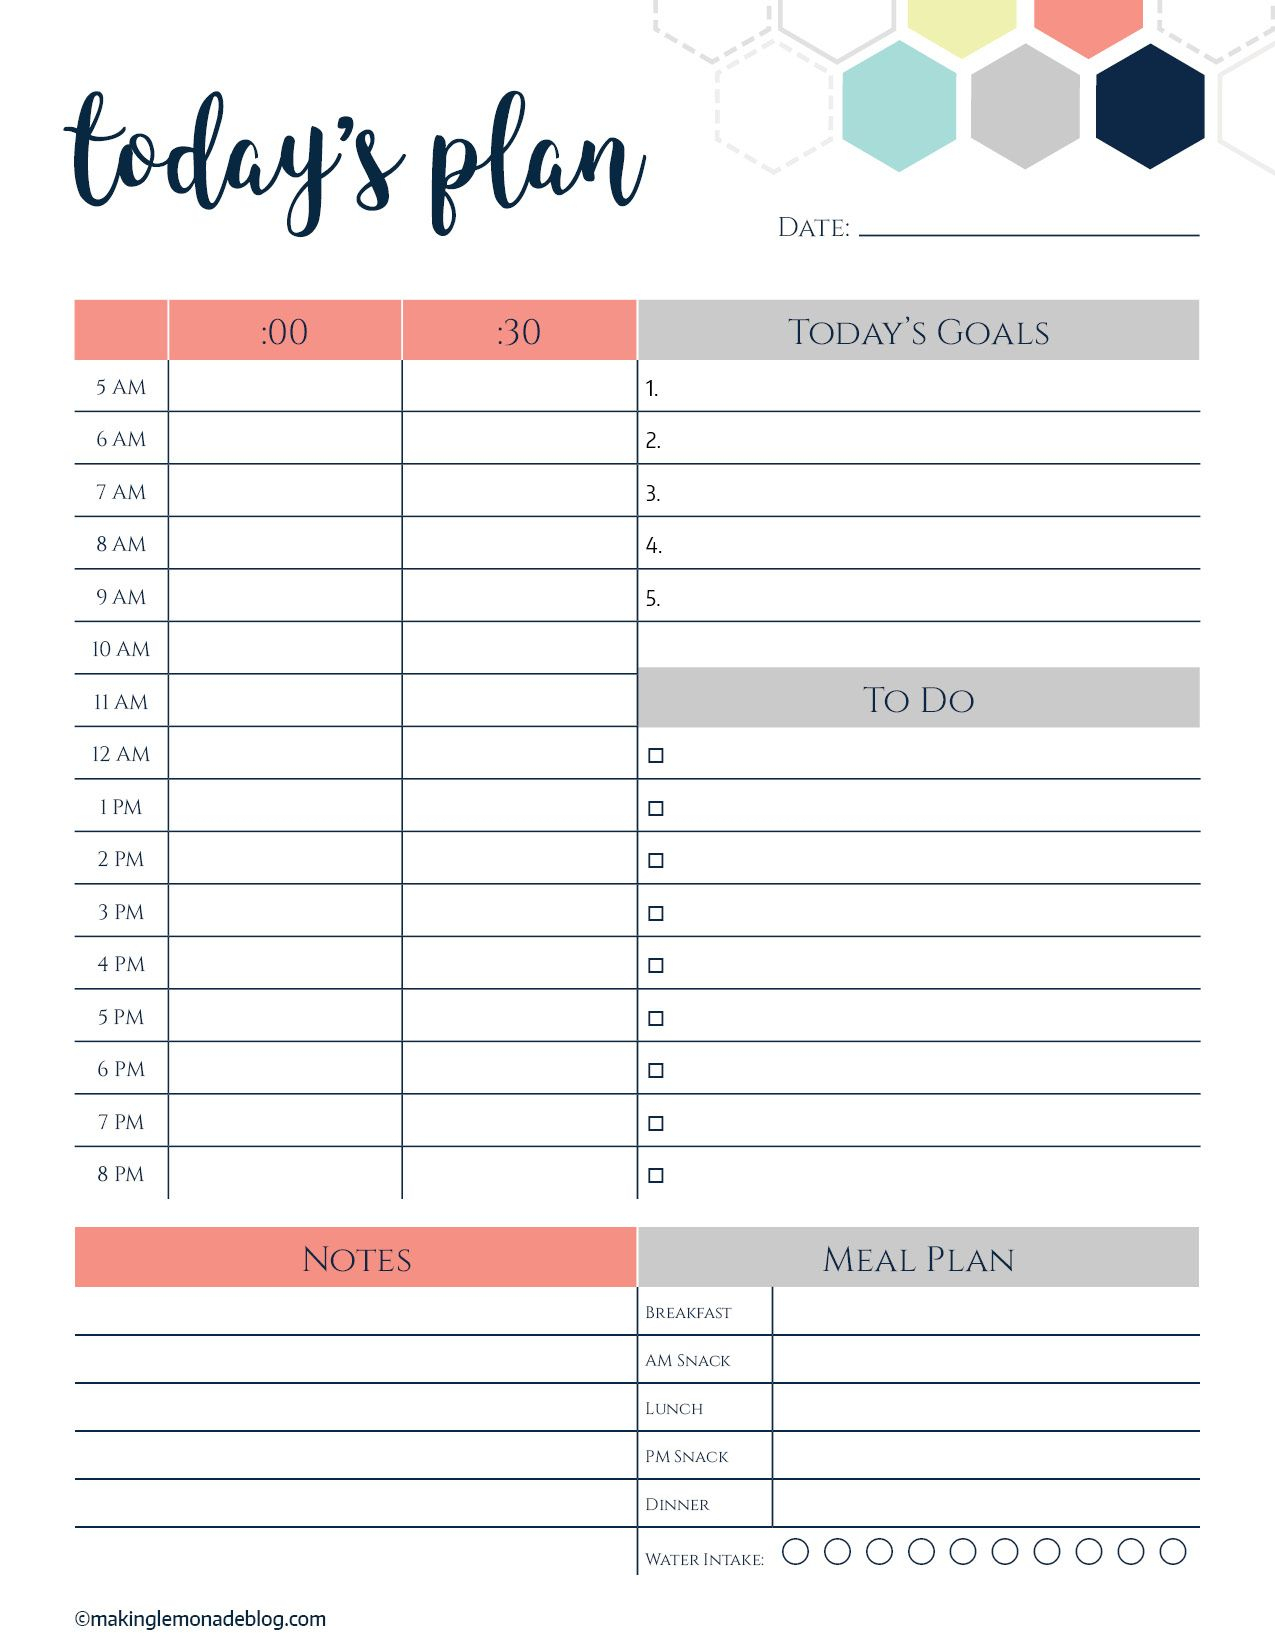 This Free Printable Daily Planner Changes Everything. Finally A Way - Planner 2018 Printable Free